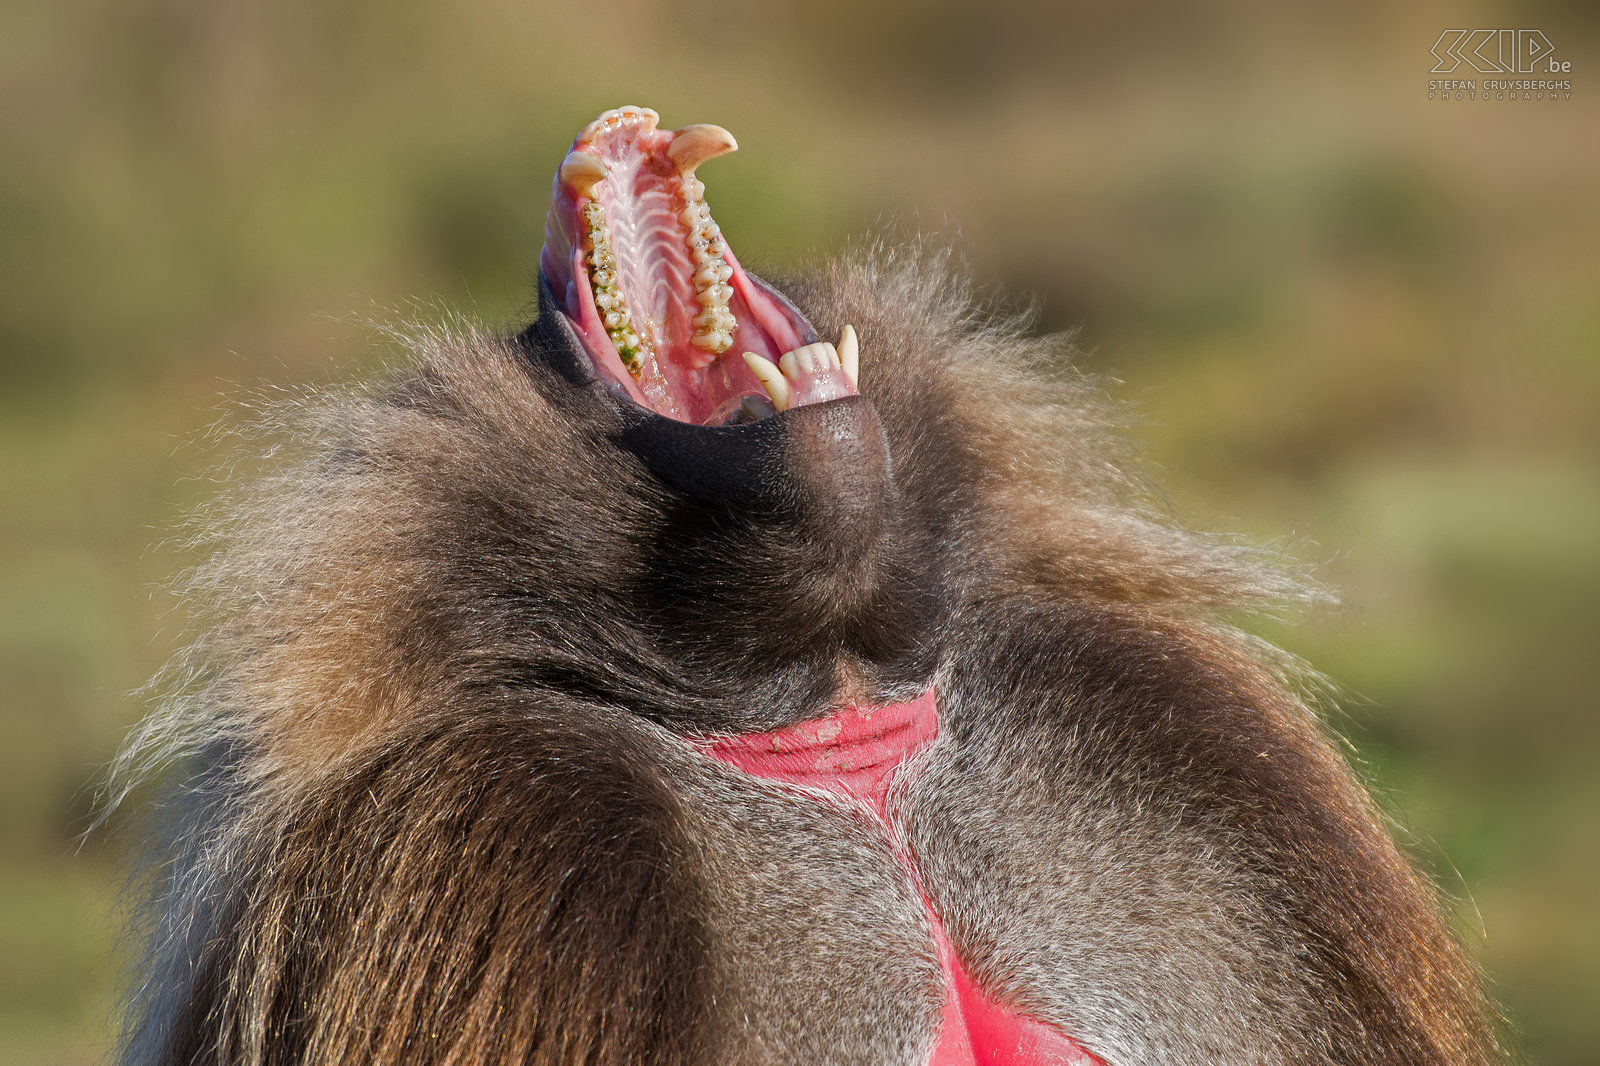 Simien Mountains - Ghenek - Yawning gelada baboon In the Simien Mountains you can found a lot of large groups of the endemic gelada baboons (Theropithecus gelada). Geladas can only be found in the highlands (2500m and higher) of Ethiopia,  they use the cliffs for sleeping, the grasslands for foraging and mostly they are quite tame.  Stefan Cruysberghs